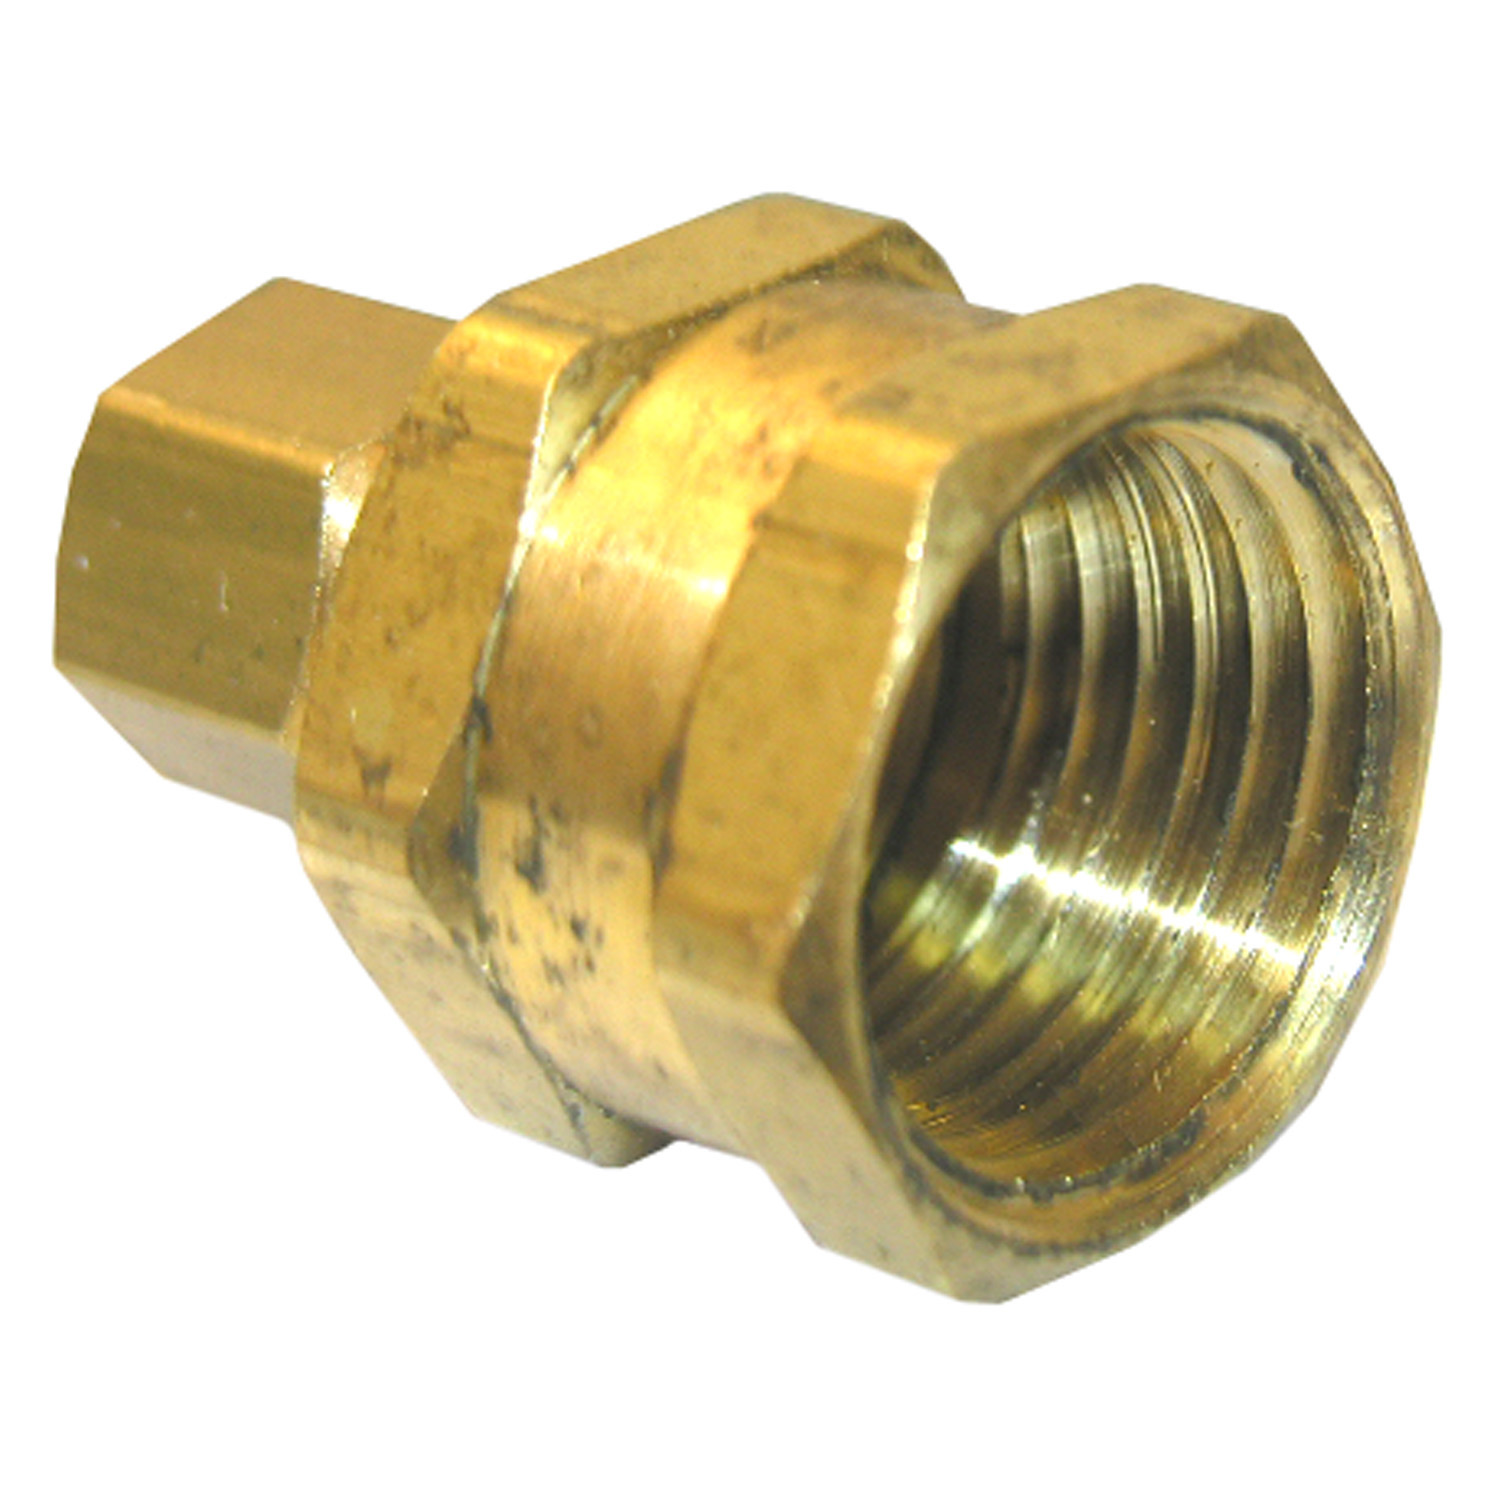 17-6617 Pipe Adapter, 1/4 x 1/2 in, Compression x FPT, Brass, 150 psi Pressure